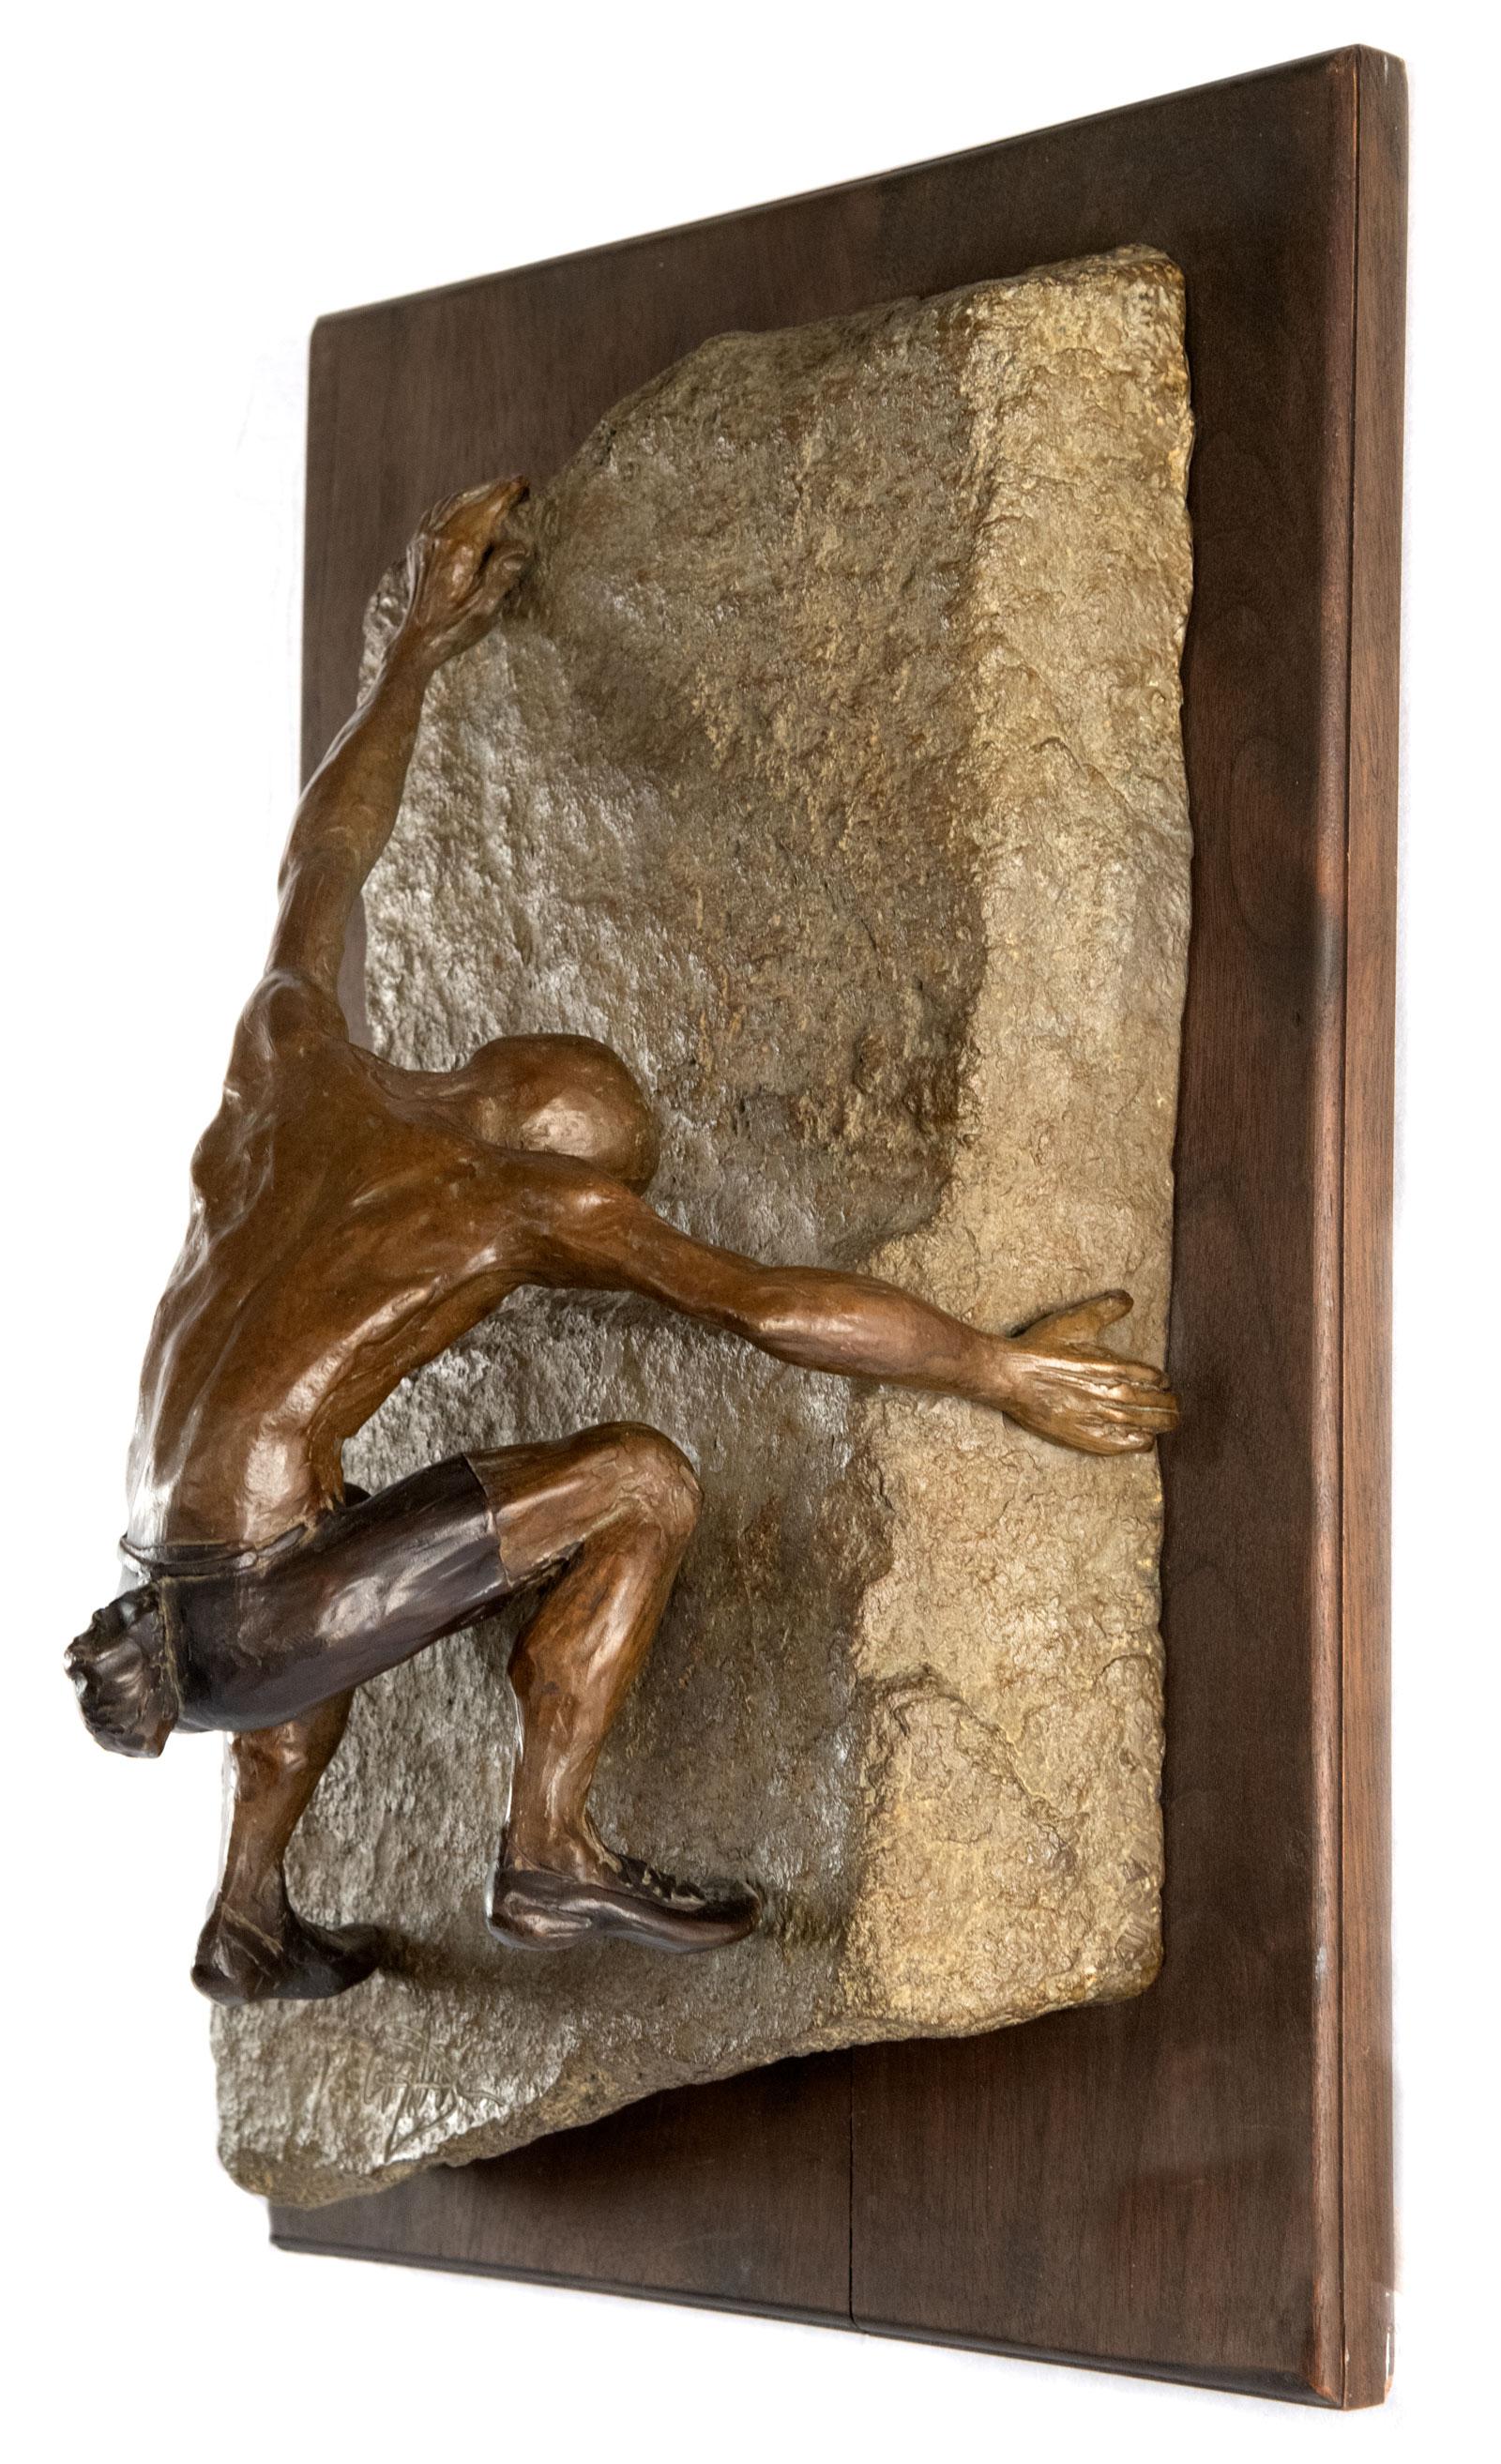 A bronze wall sculpture of a rock climber, signed lower right.

Jim Rennert was born in 1958, and grew up in Las Vegas, Nevada, and Salt Lake City, Utah. After 10 years of working in business Jim started sculpting in 1990. He had his first bronze